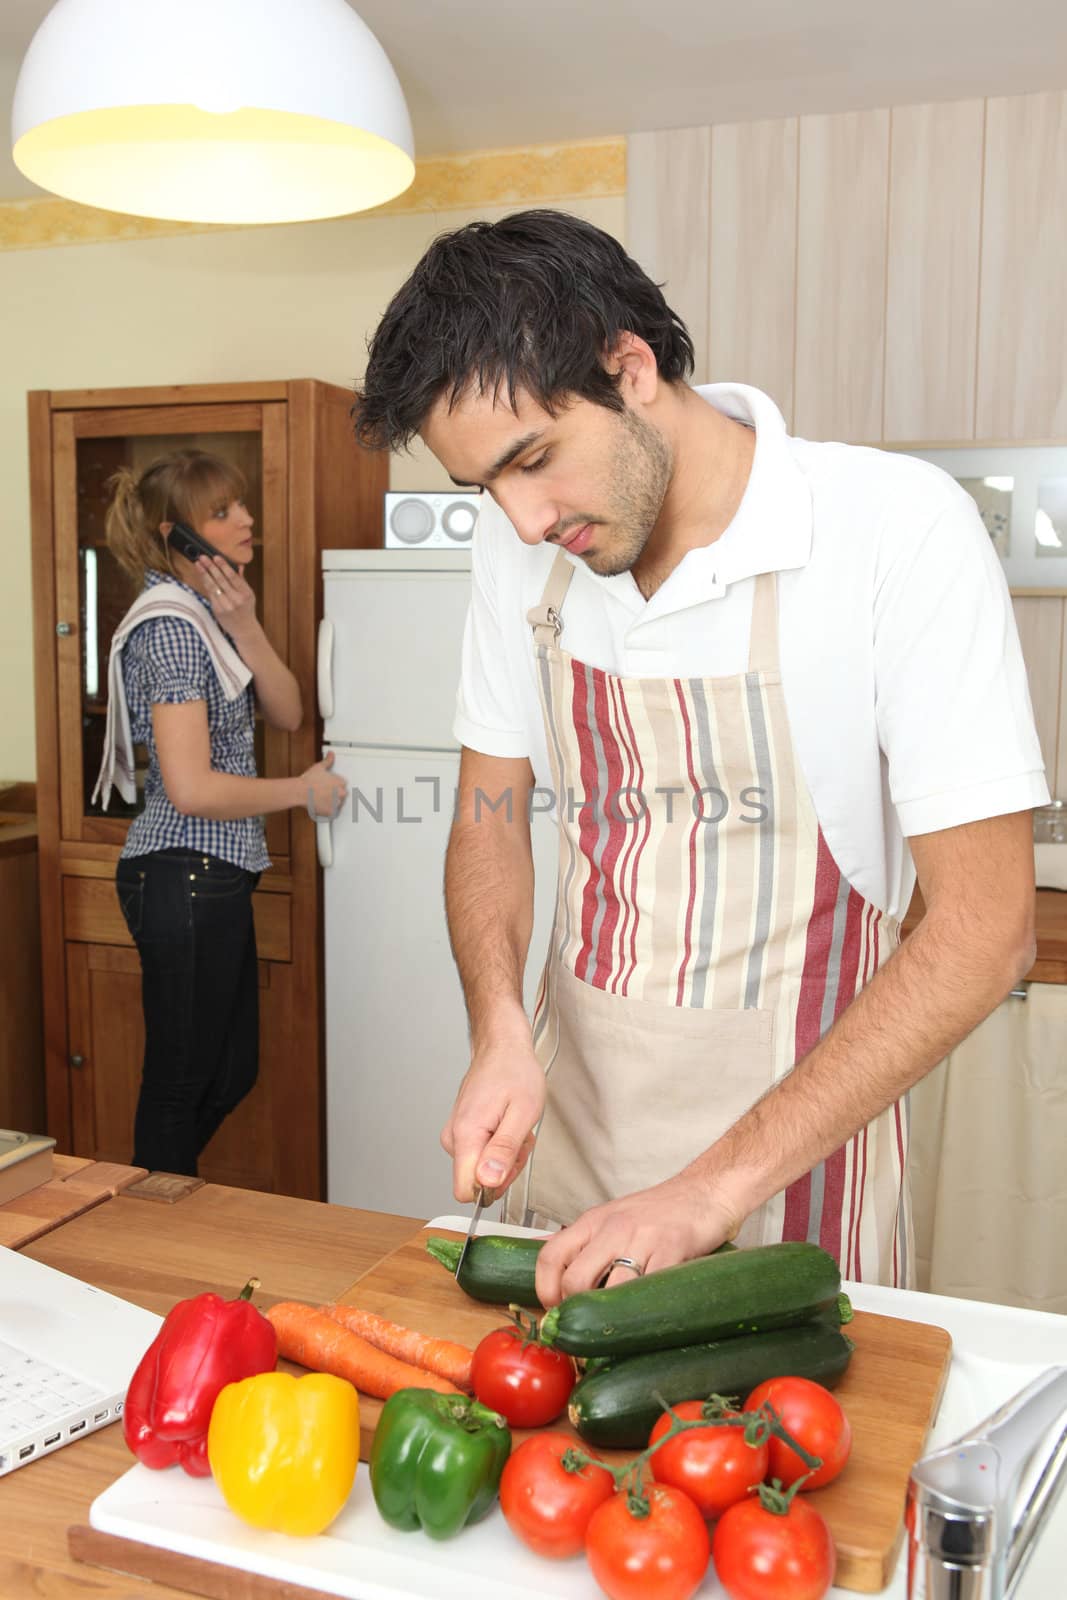 Woman on phone and man preparing meal